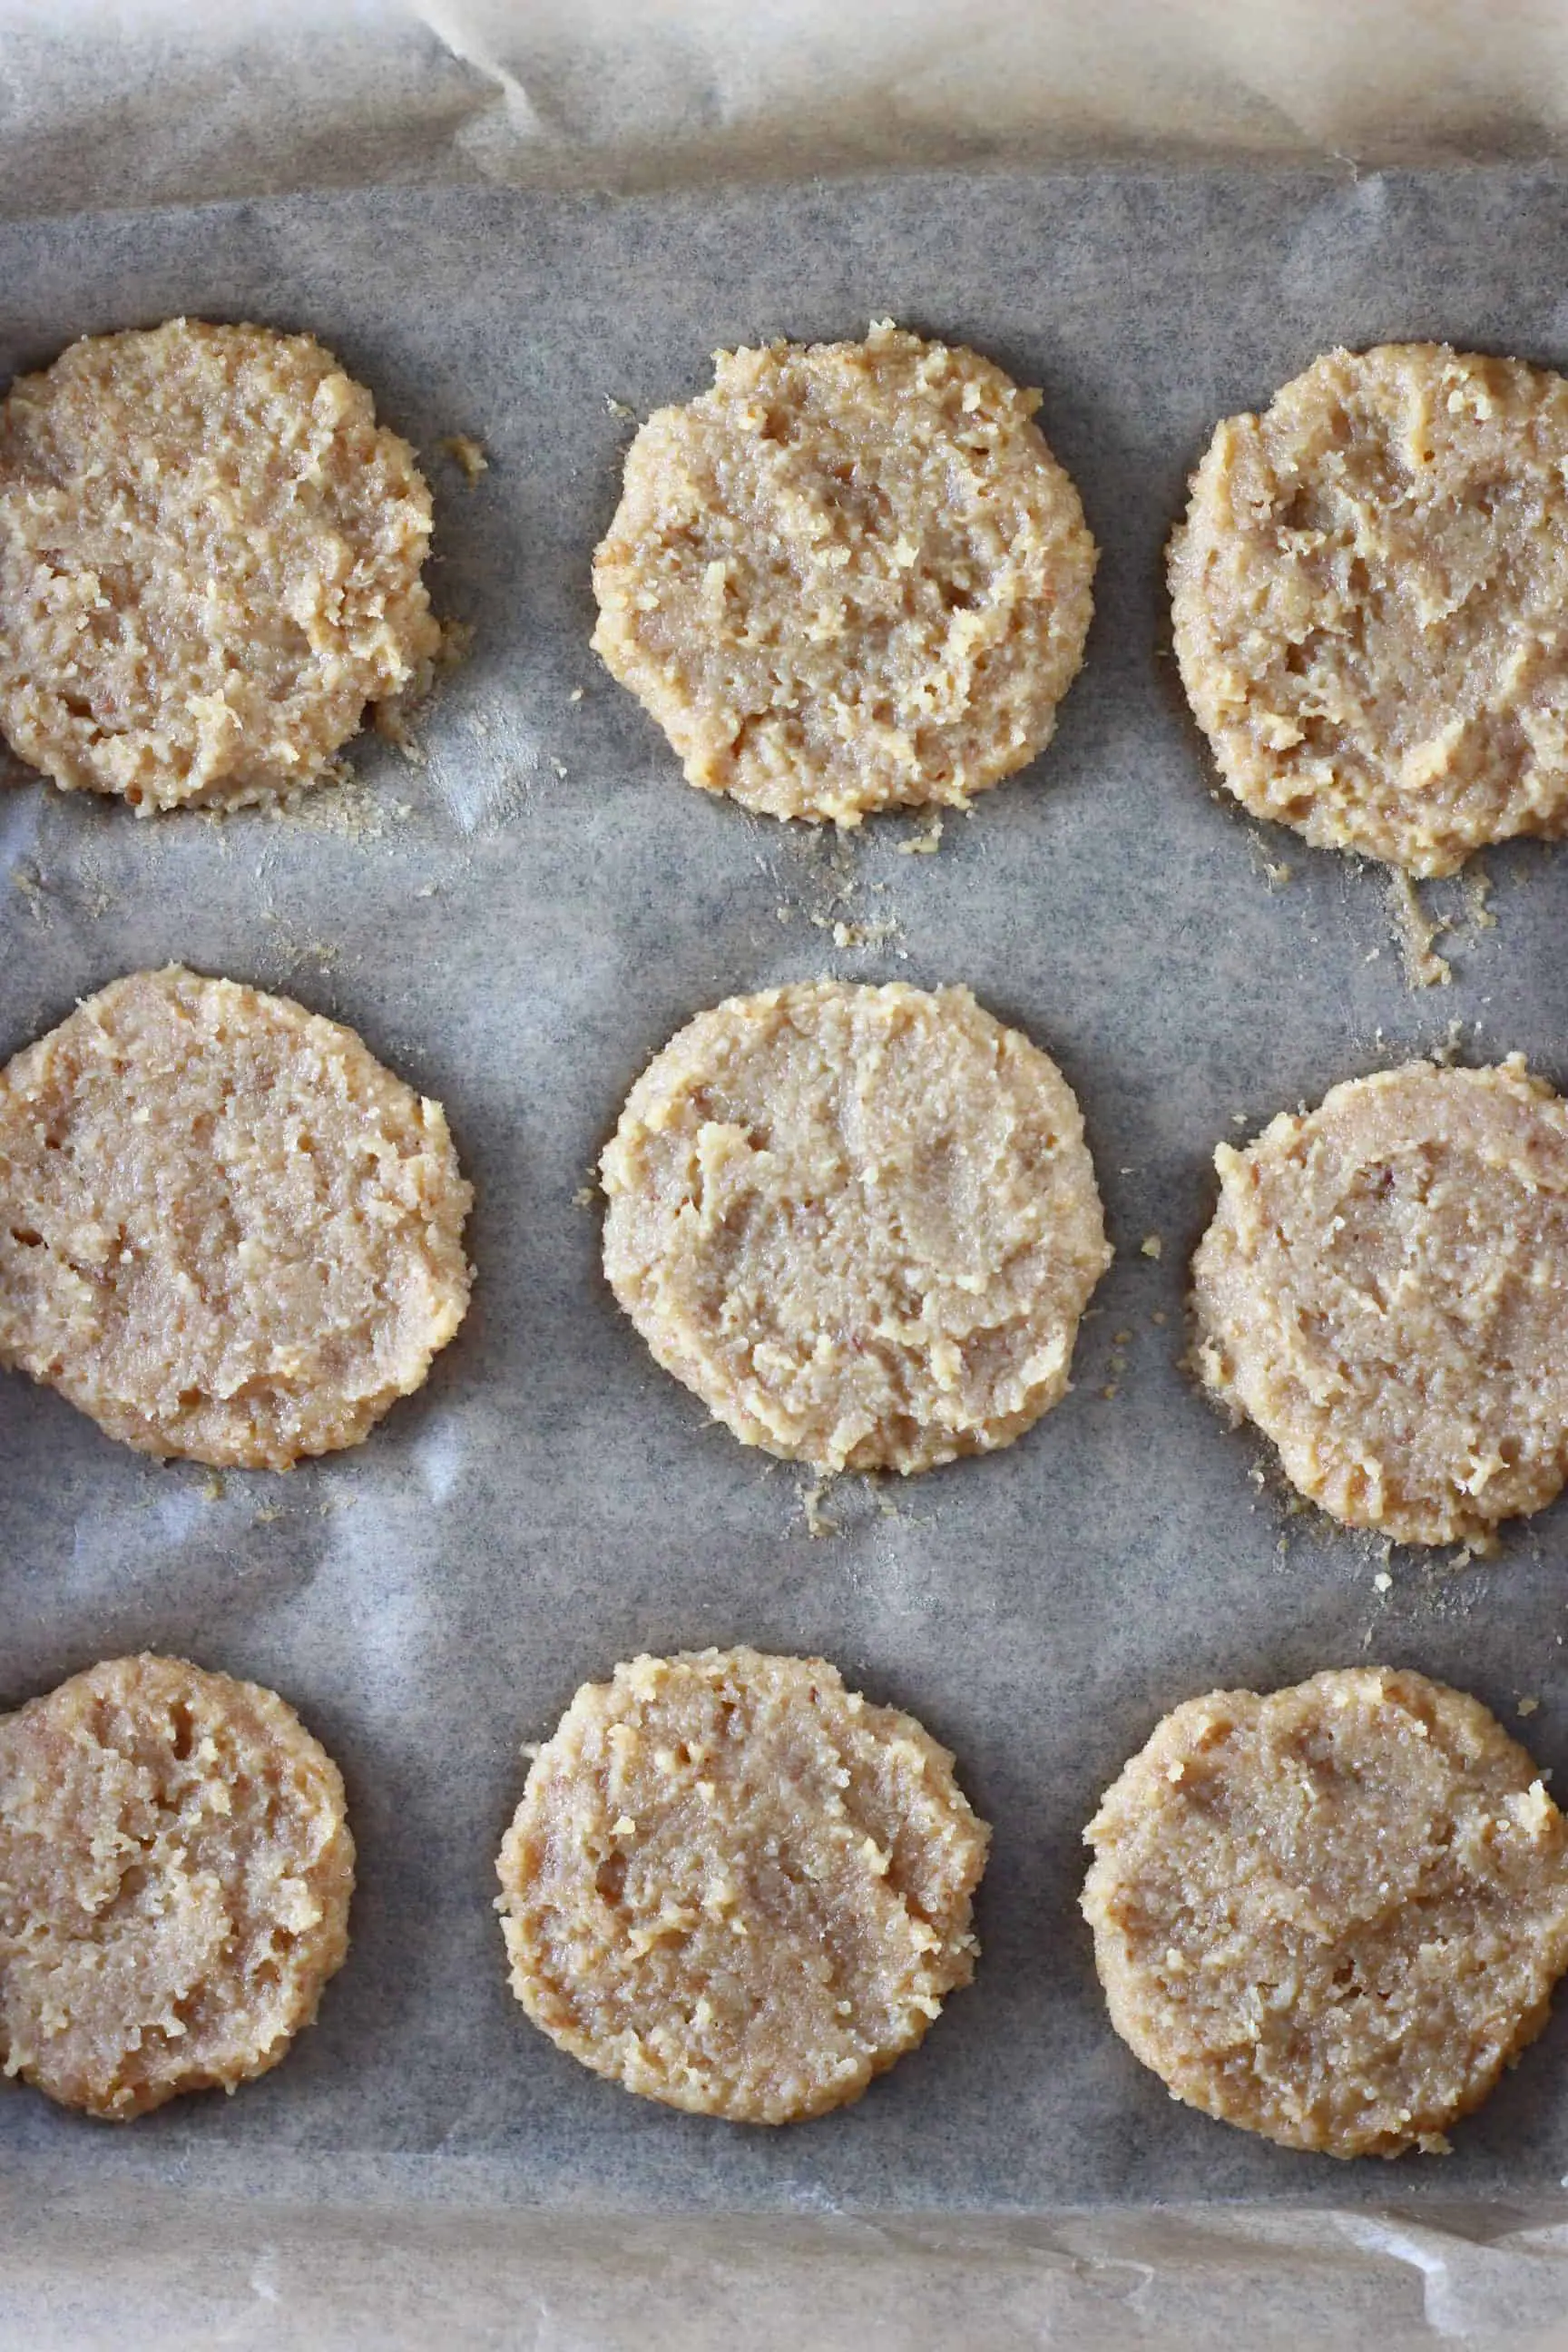 Nine raw almond butter cookies on a baking tray lined with baking paper